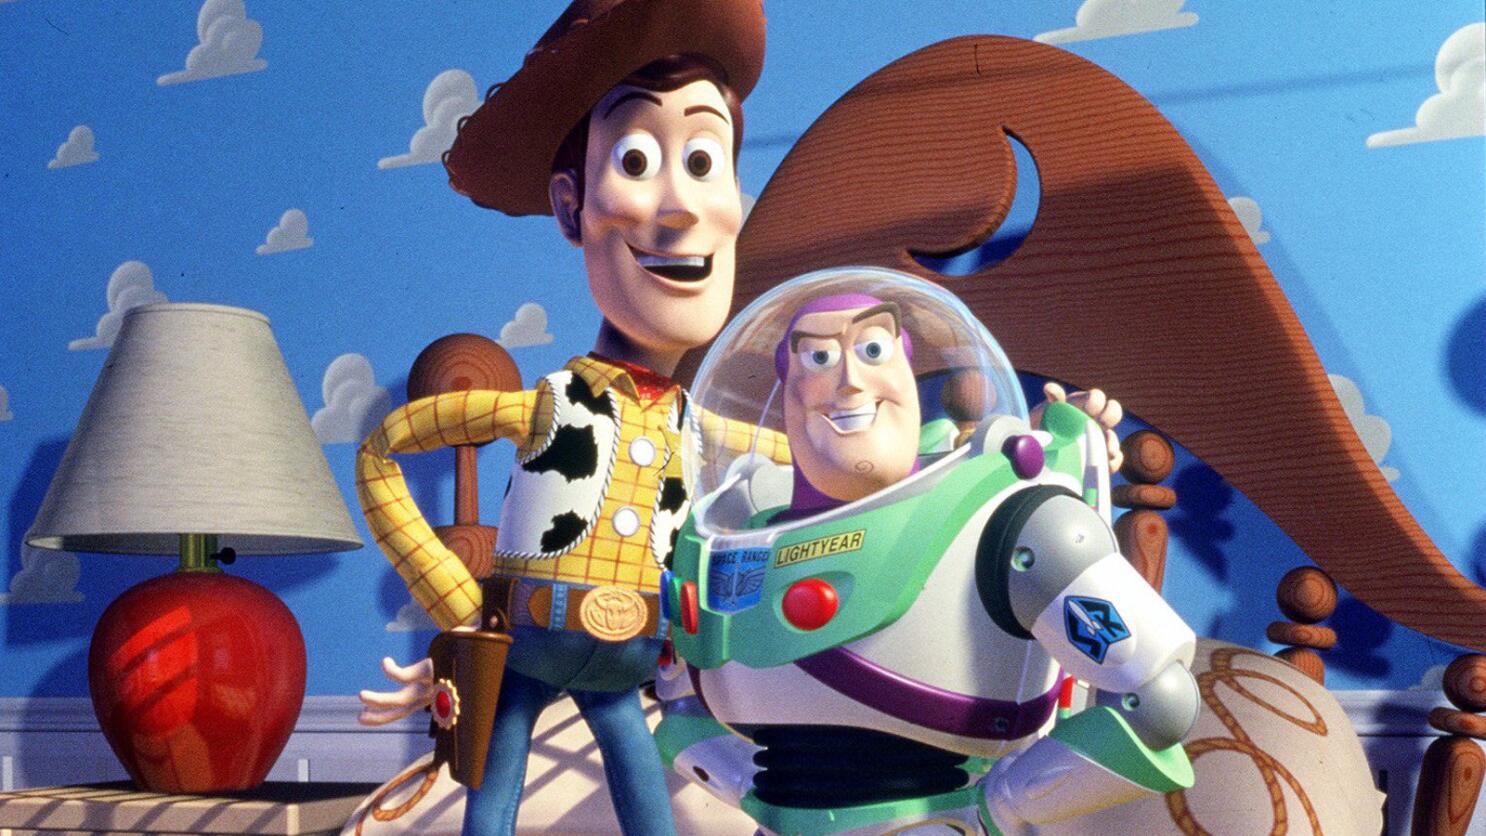 Movies on TV this week: 'Toy Story' and 'Toy Story 2' on Freeform